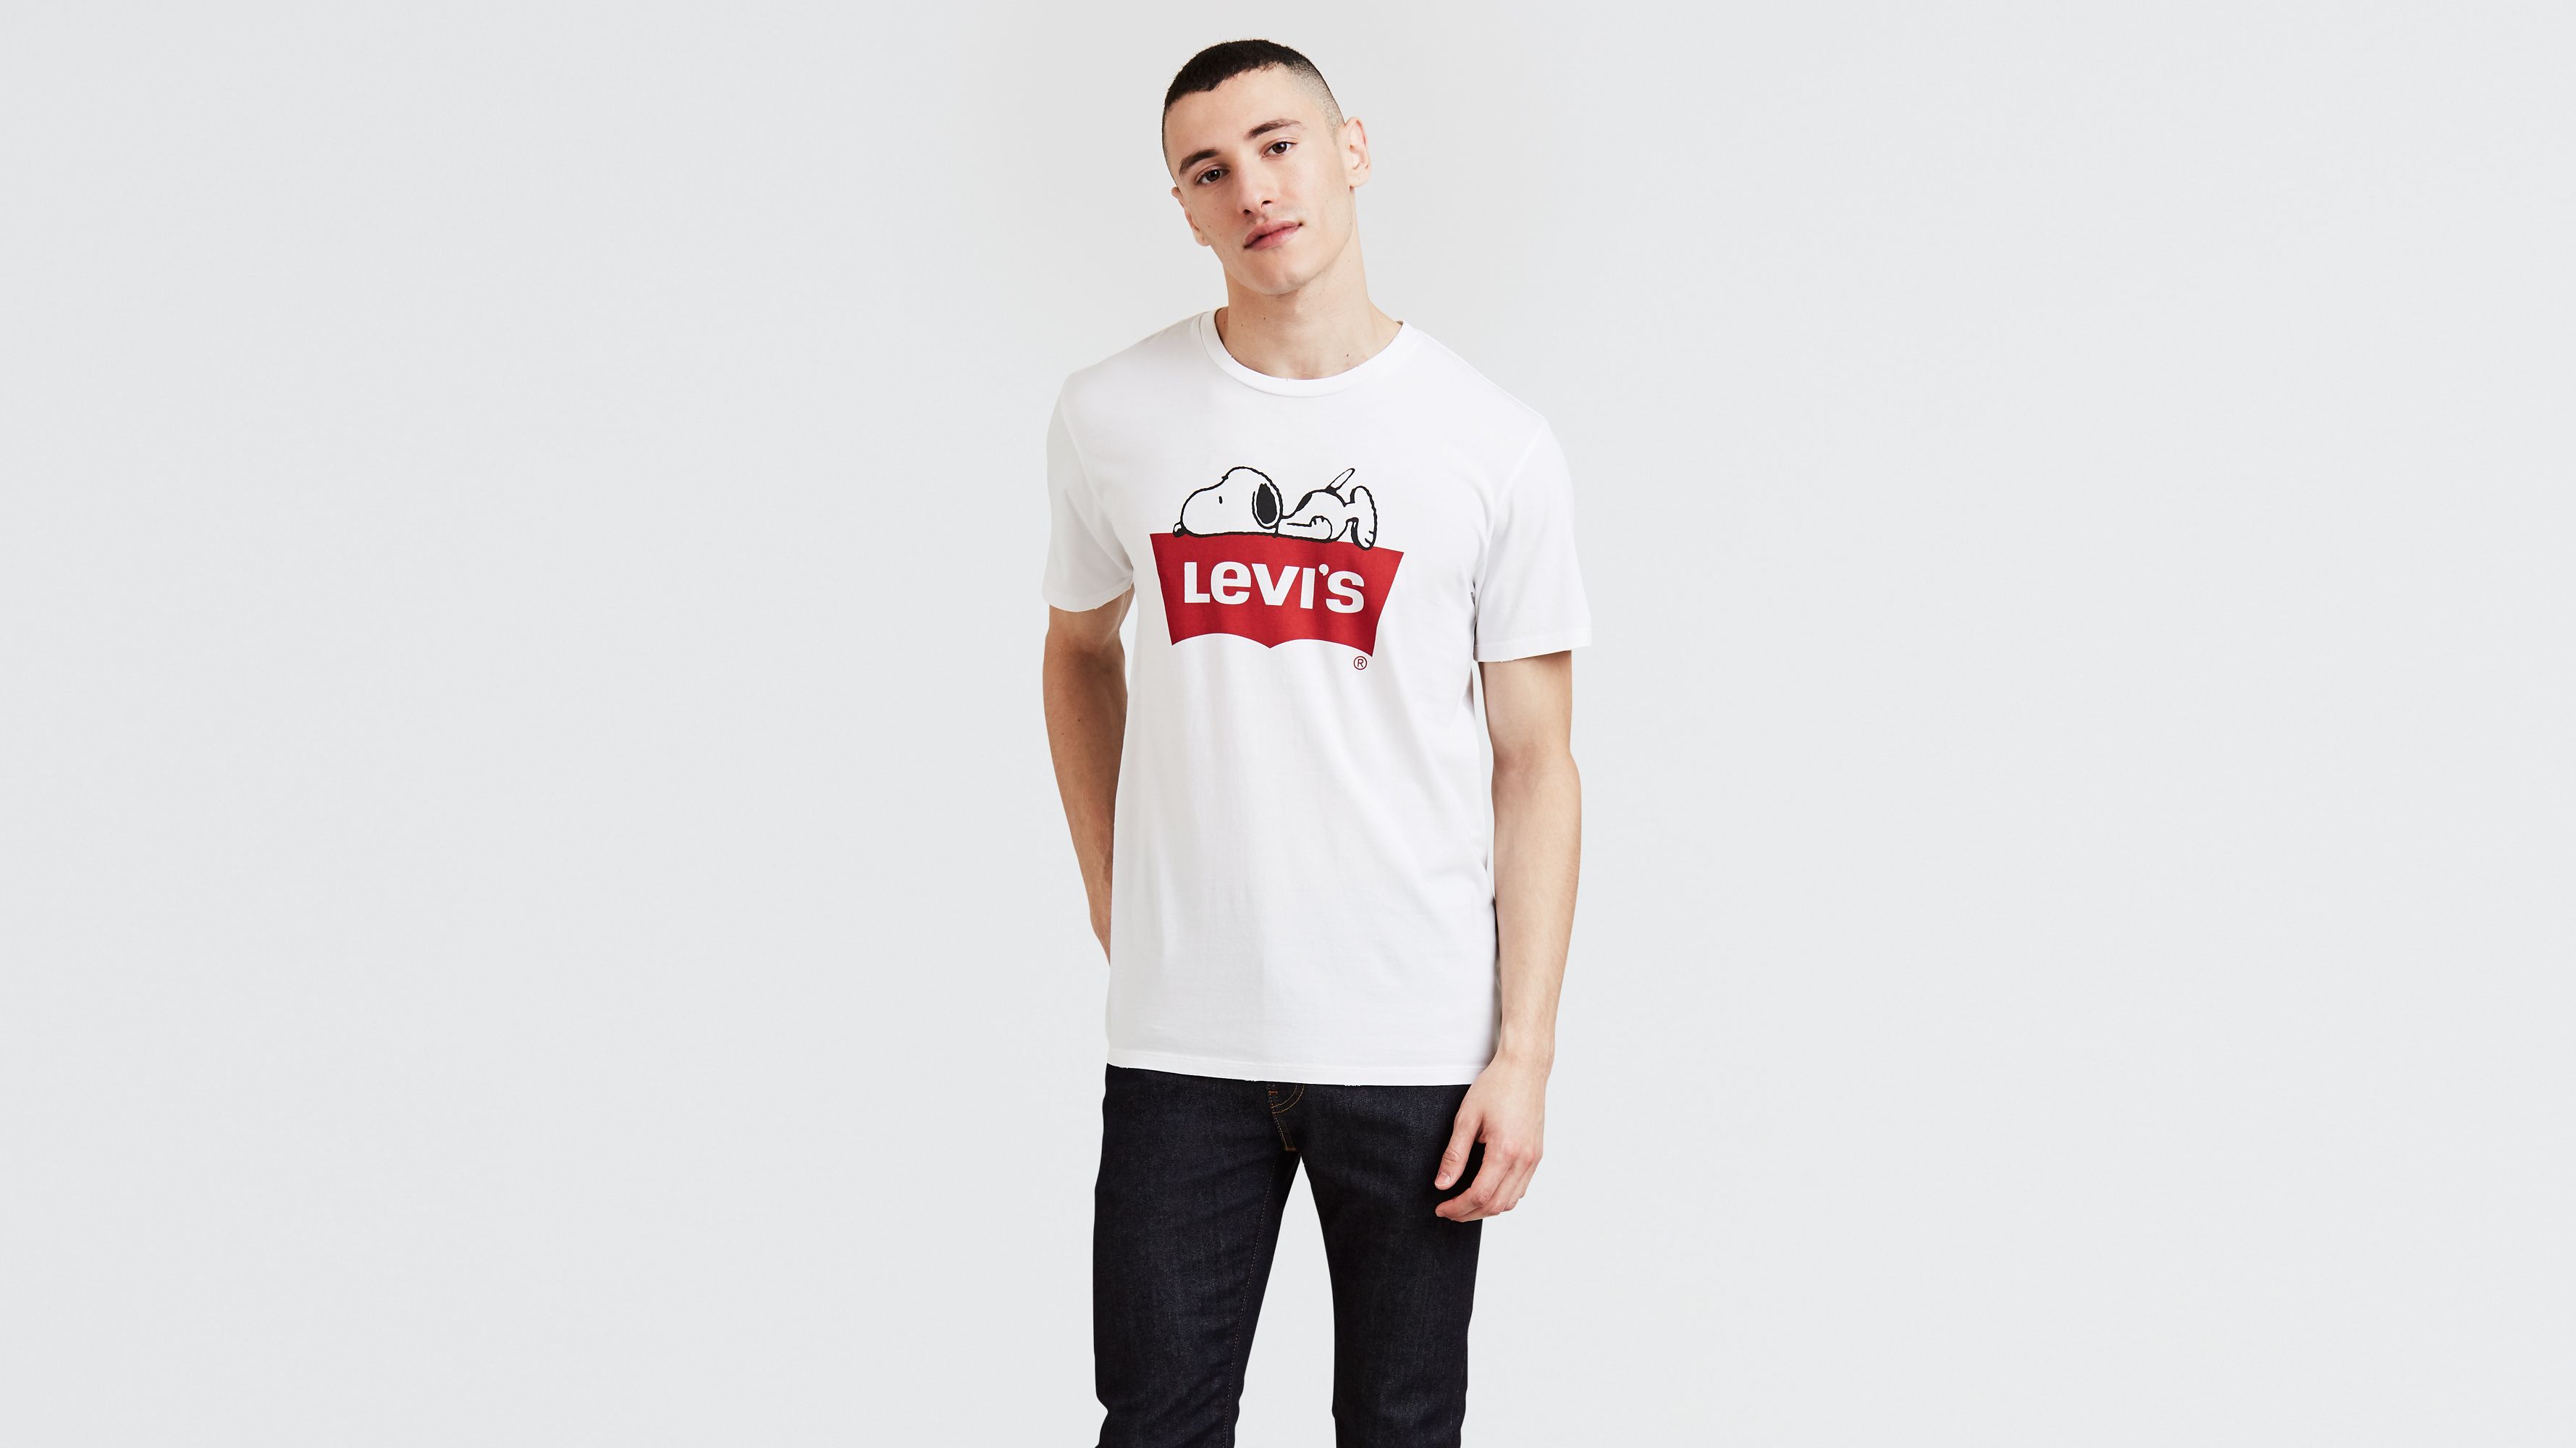 levis white shirt with red logo